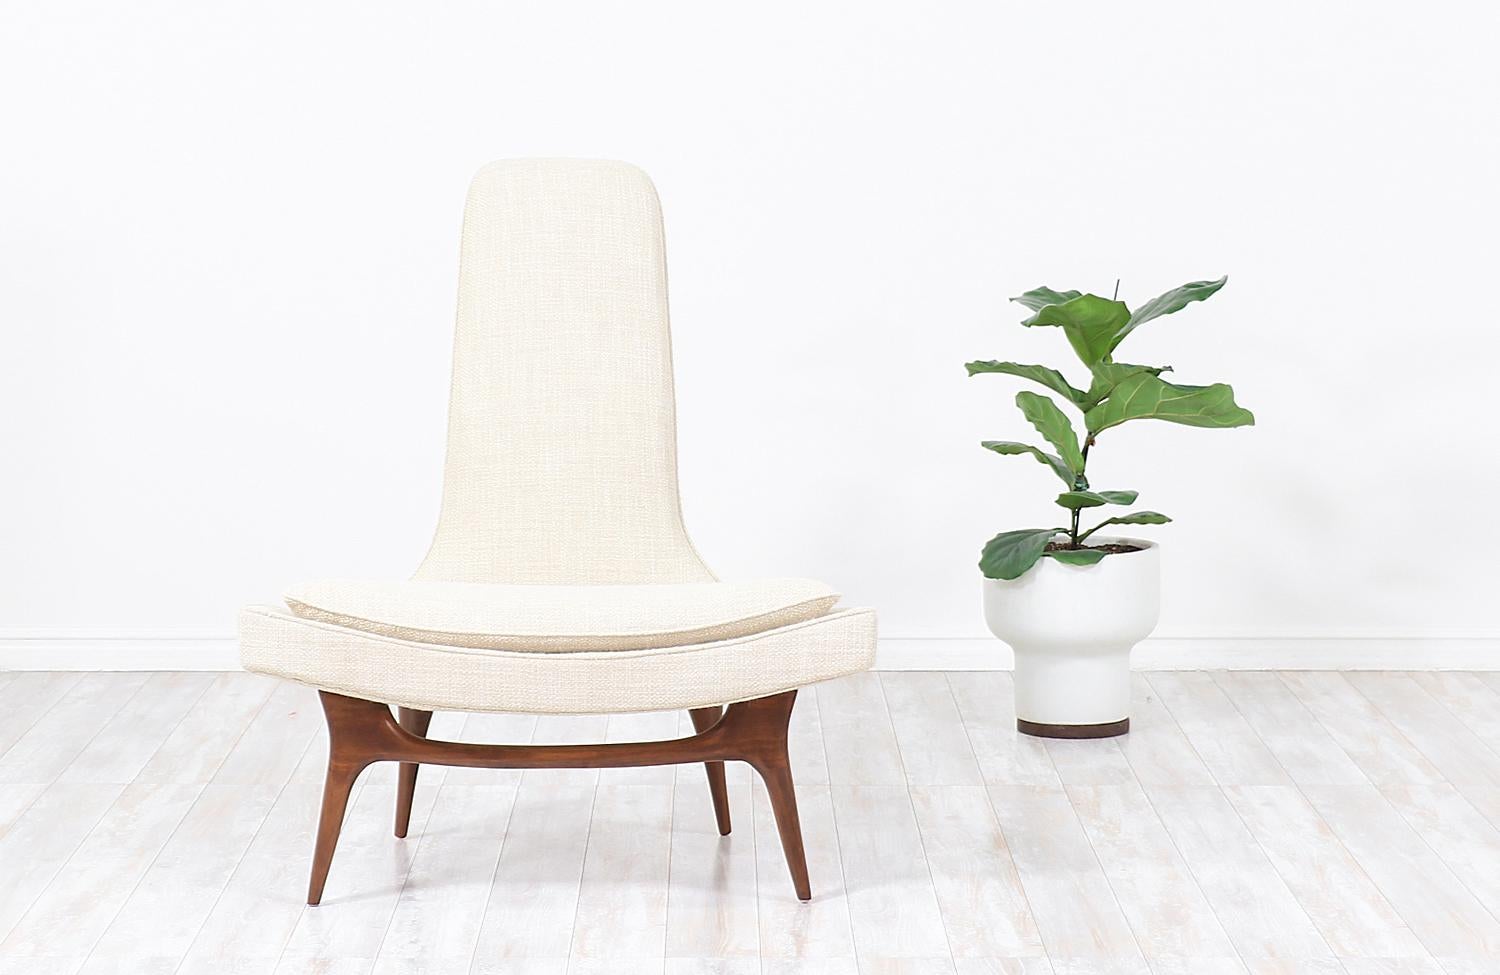 Stunning Mid-Century Modern high-back chair manufactured by Karpen of California for their iconic “Chair-Foam” line designed in the United States, circa 1960s. This luxury contoured lounge chair features a sturdy walnut wood base holding the molded